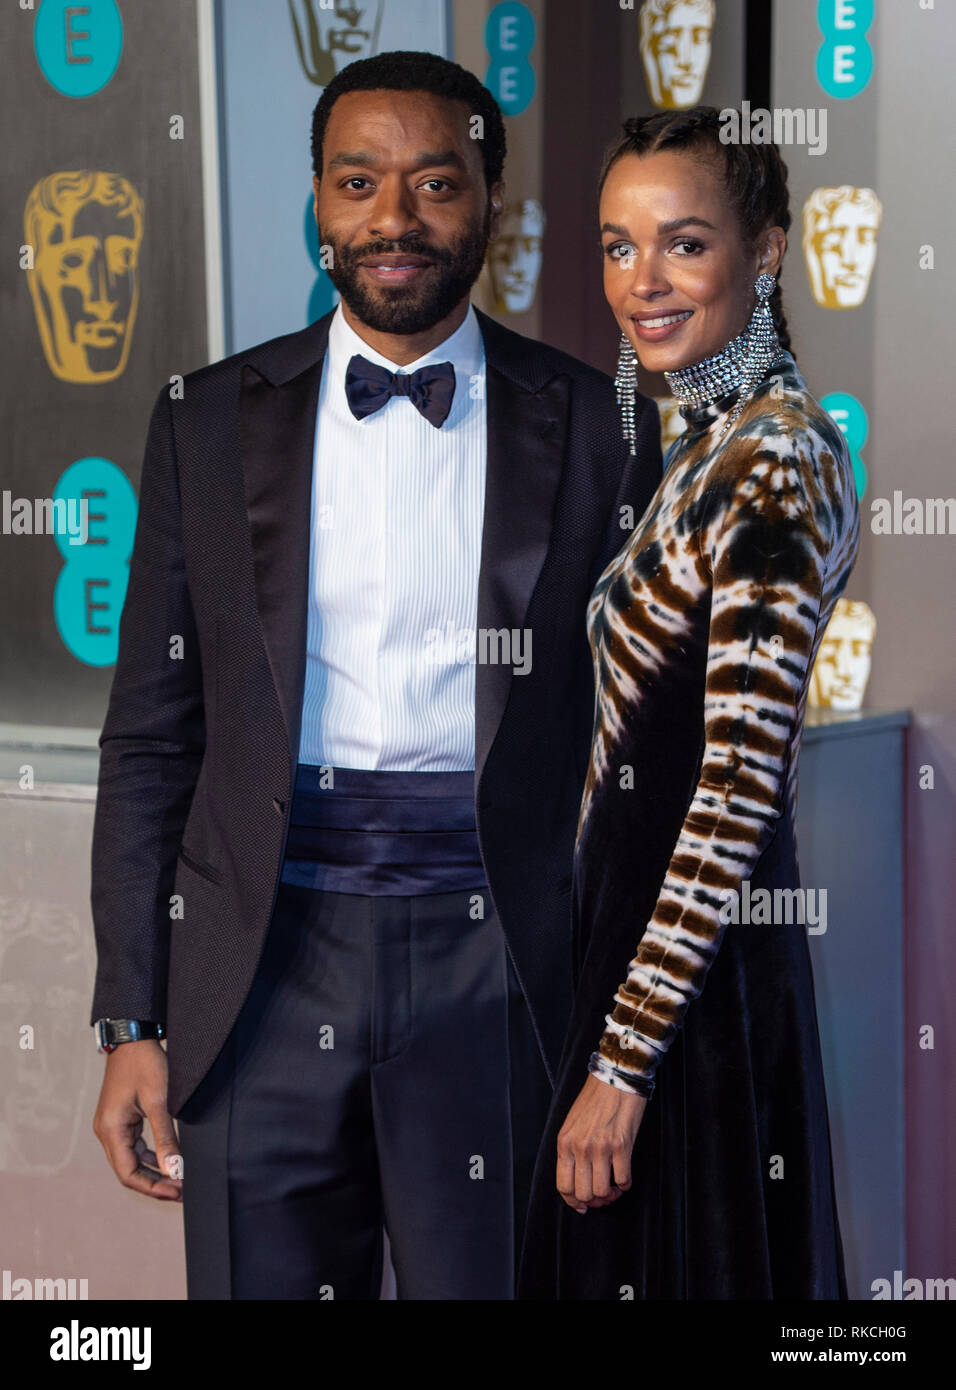 London, UK. 10th Feb, 2019. Chiwetel Ejiofor and Frances Aaternir attends the EE British Academy Film Awards at the Royal Albert Hall, London, England on the 10th February 2019 Credit: Gary Mitchell, GMP Media/Alamy Live News Stock Photo